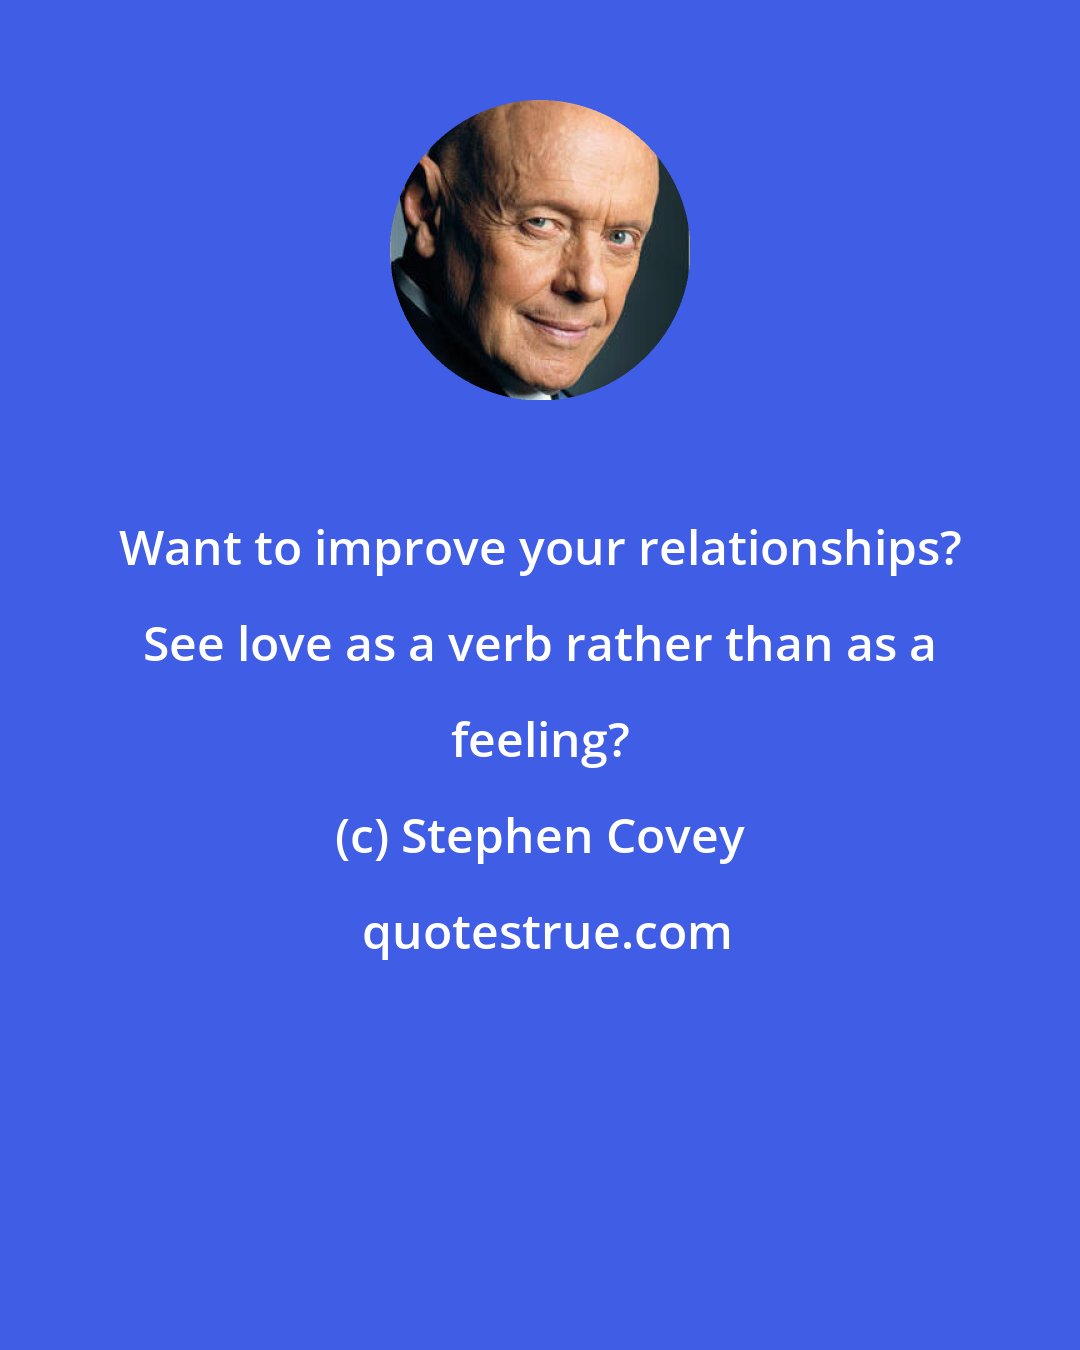 Stephen Covey: Want to improve your relationships? See love as a verb rather than as a feeling?